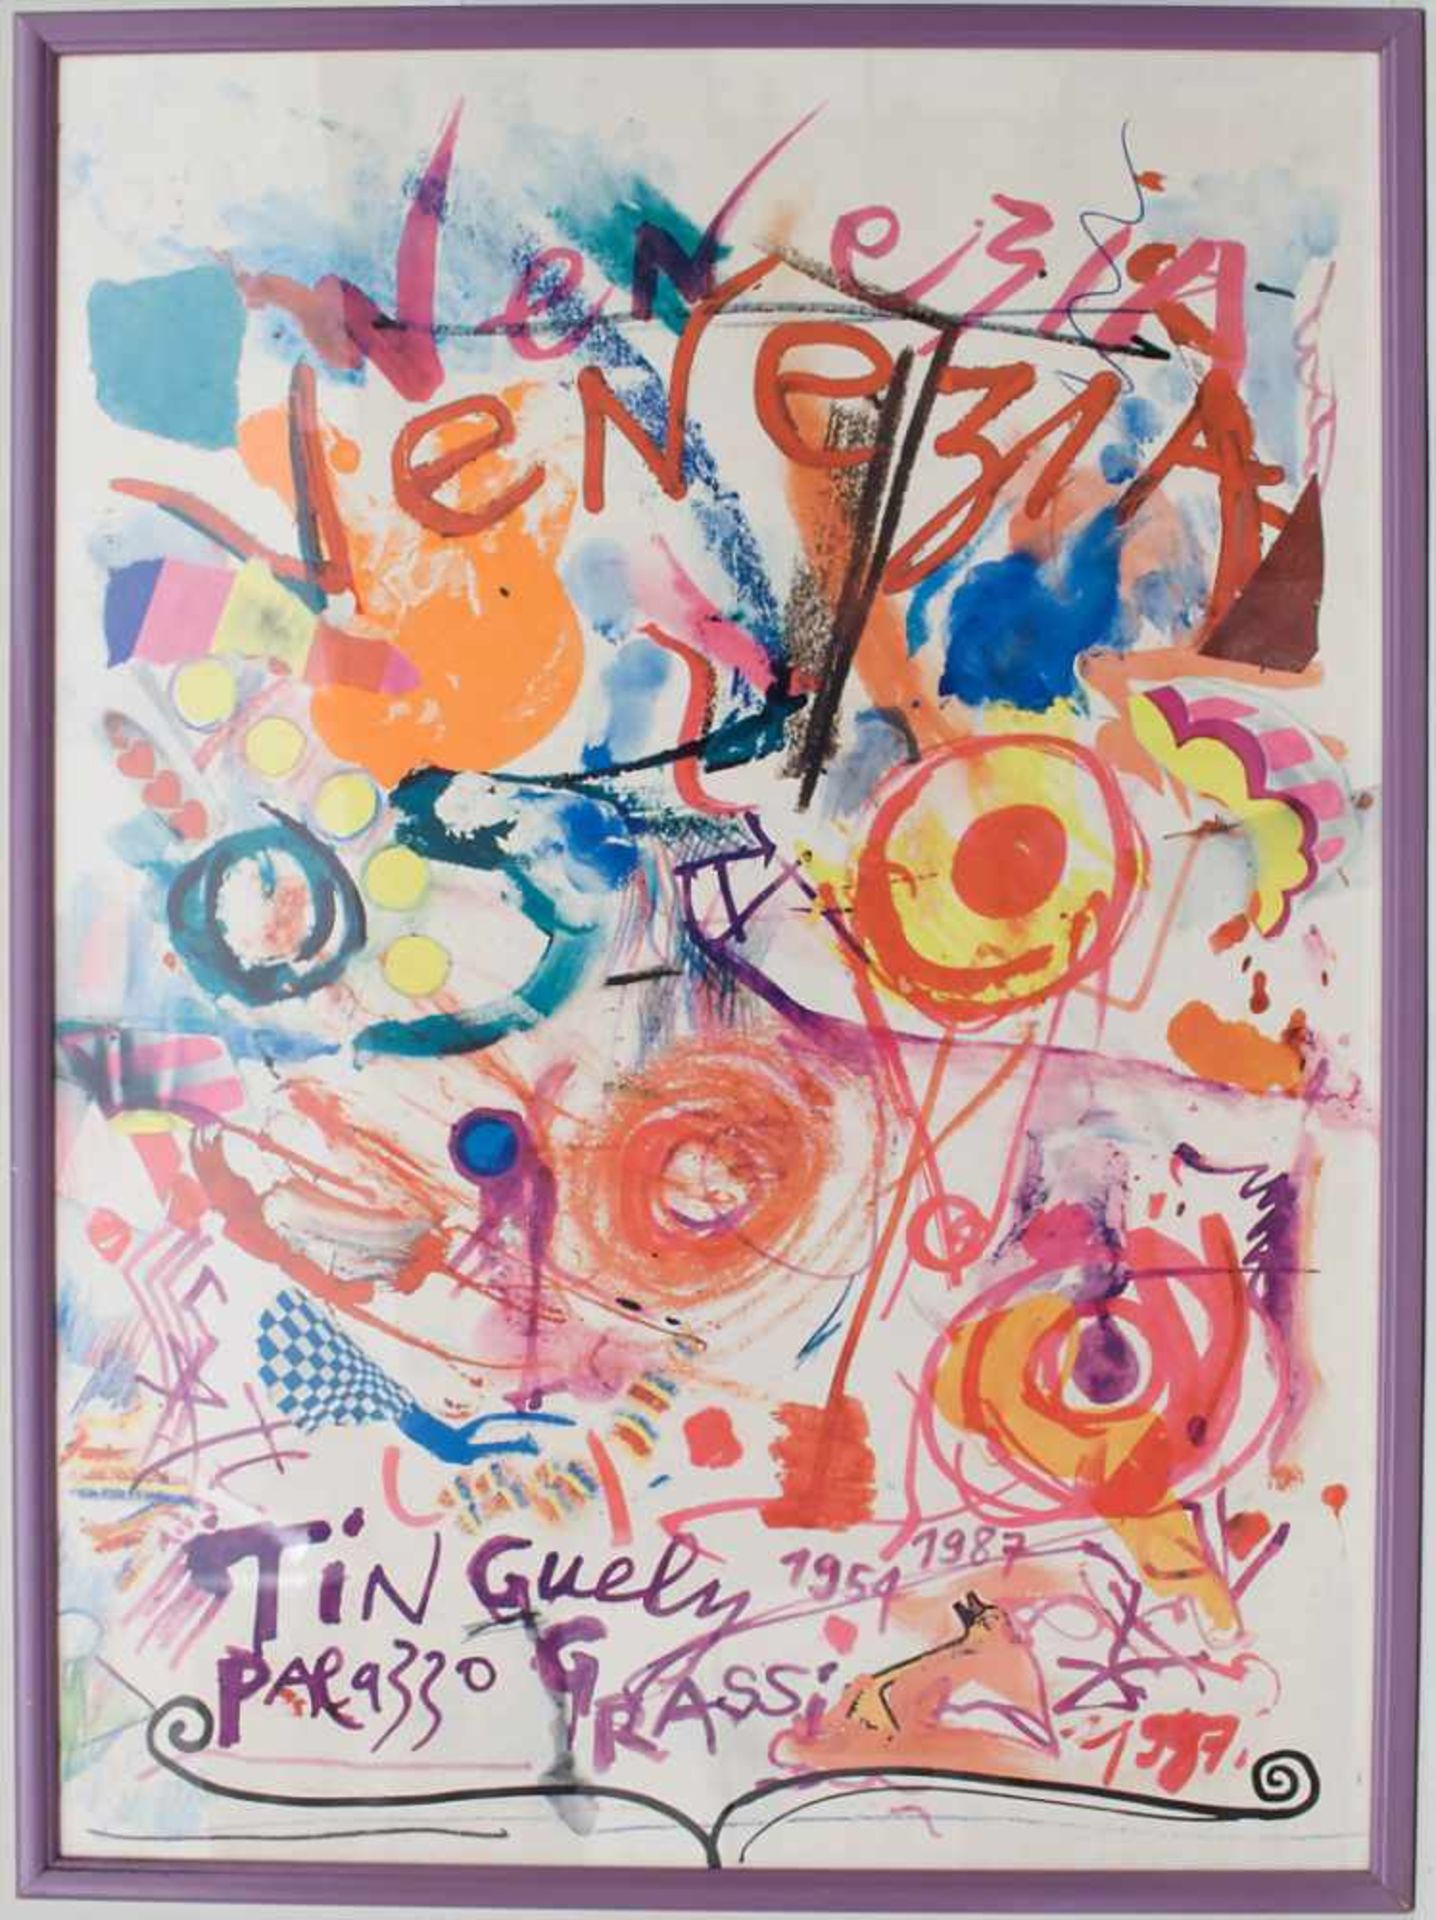 Jean Tinguely (1925-1991), Ausstellungsplakat 'Palazzo Grassi' / An exhibition poster 'Palazzo